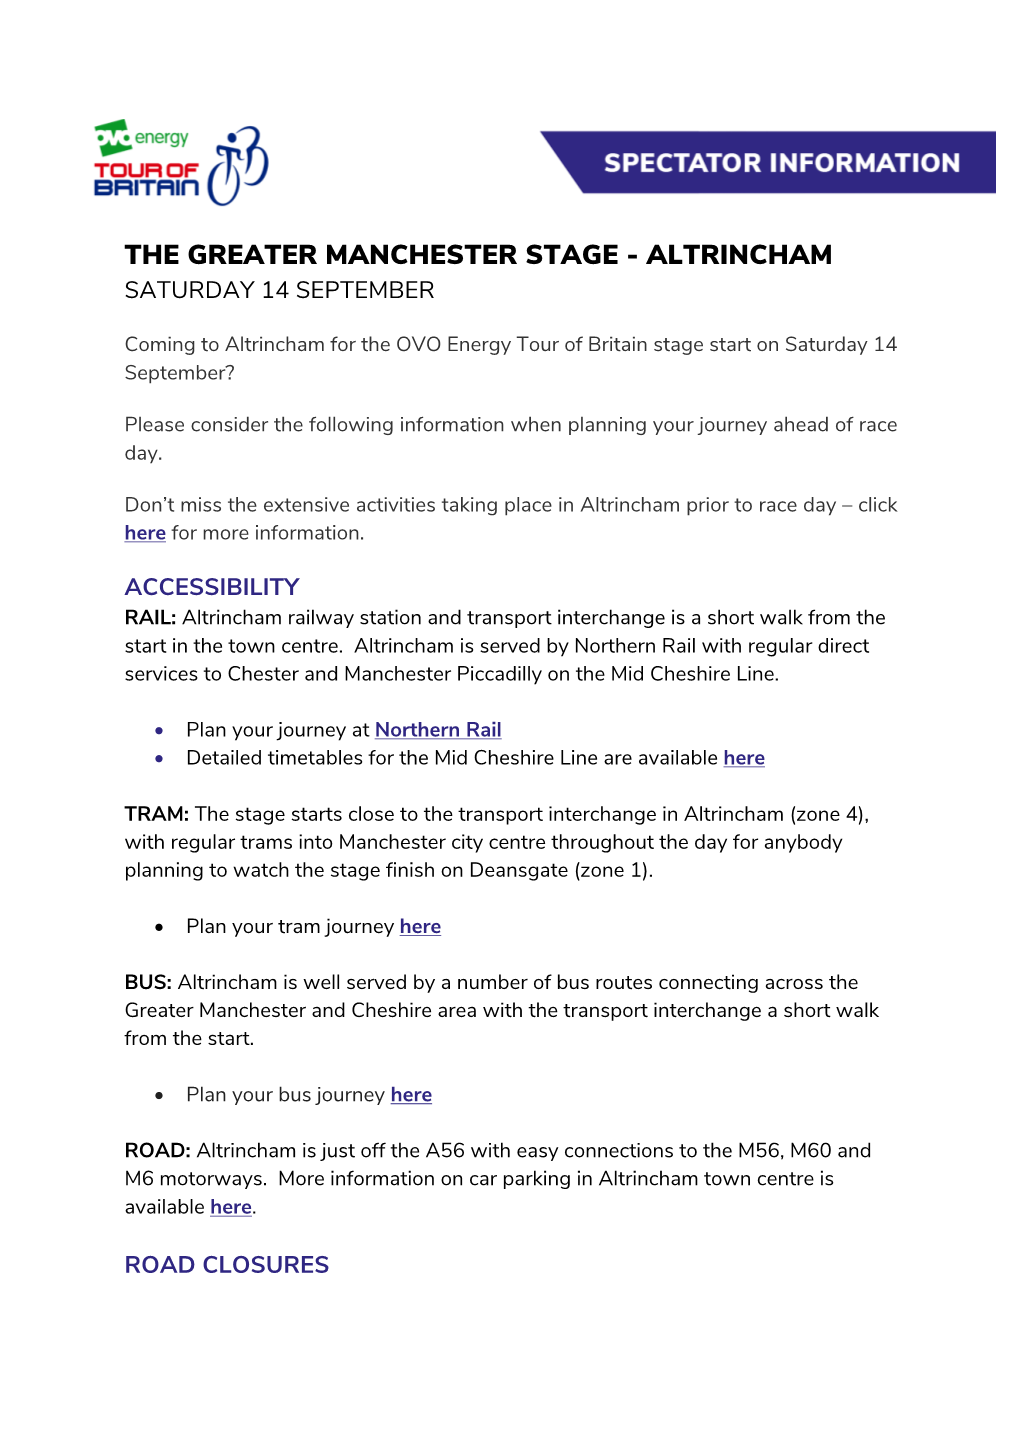 The Greater Manchester Stage - Altrincham Saturday 14 September